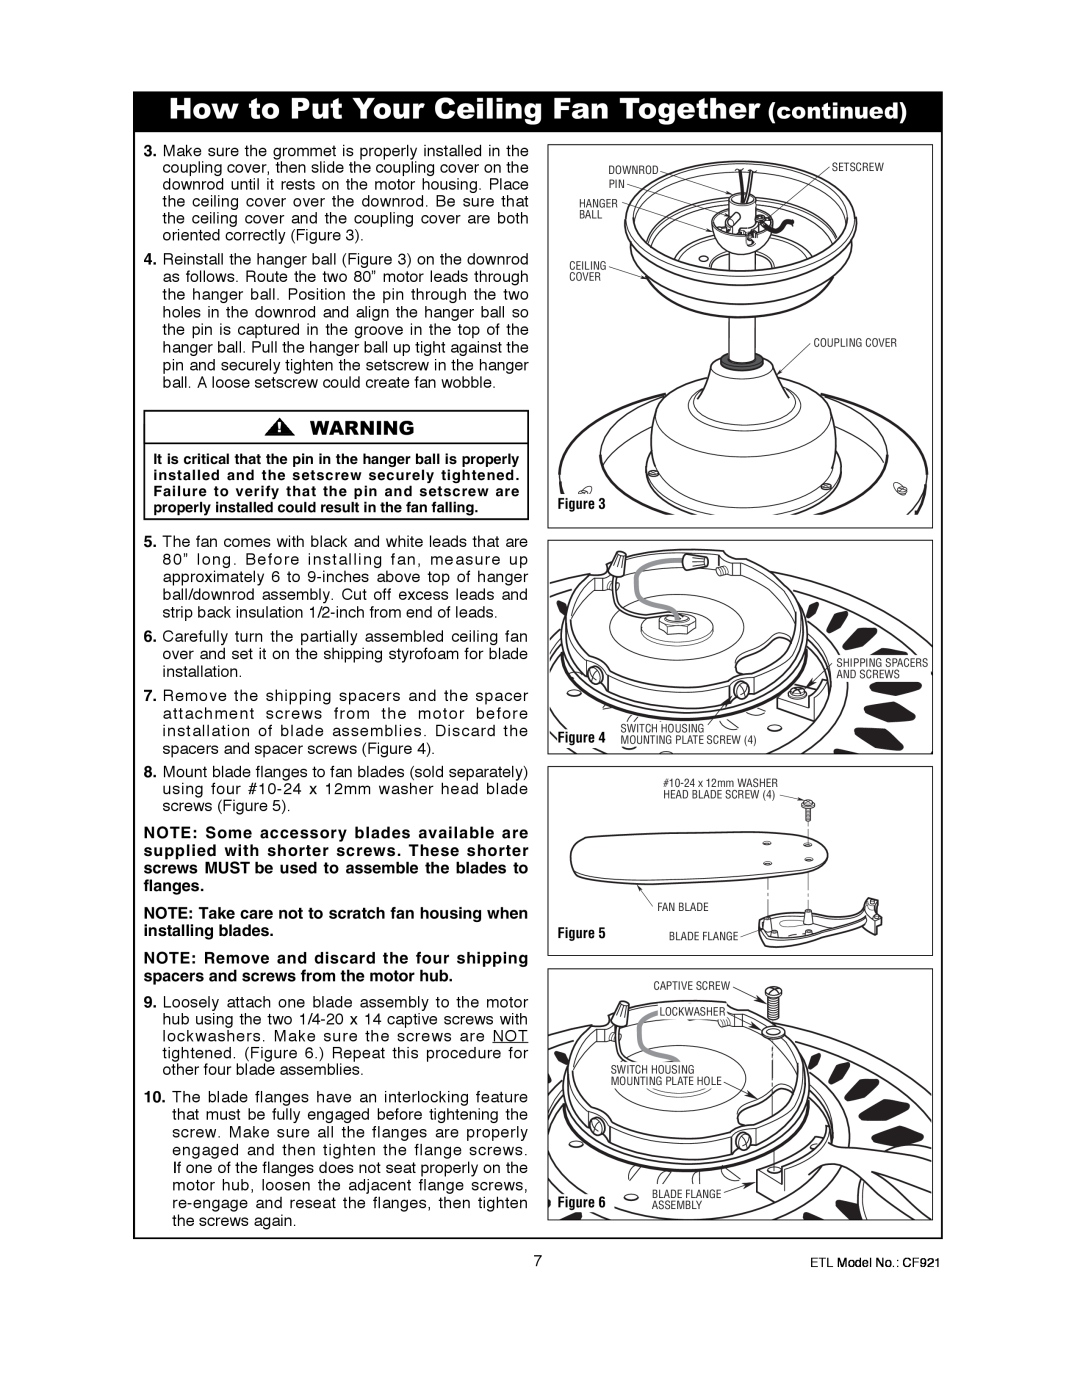 Electrolux CF921BS00, CF921ORB00, CF921GES00, CF921CK00 owner manual How to Put Your Ceiling Fan Together continued 